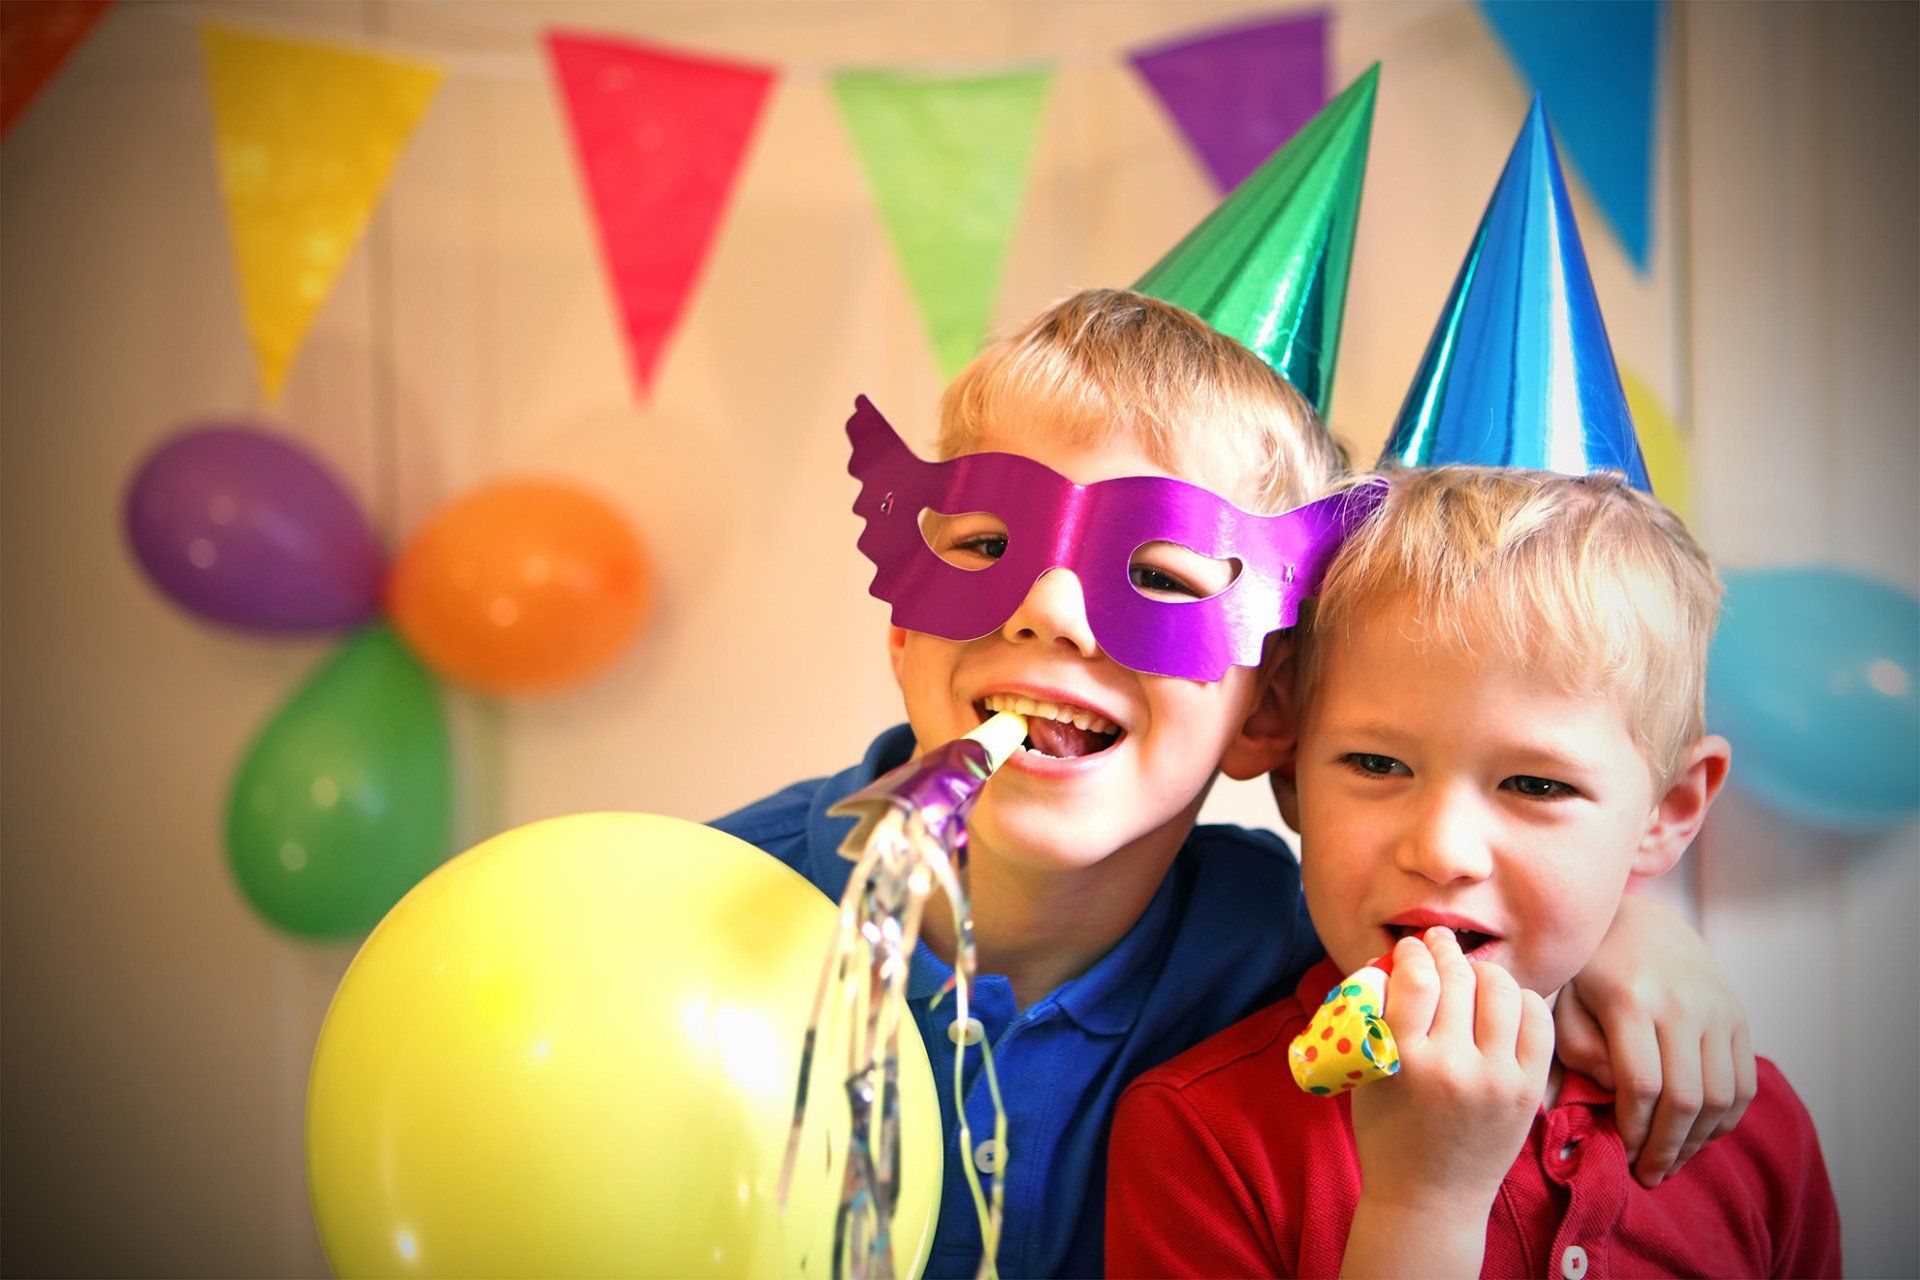 two young boys wearing party hats and masks are blowing party horns at a birthday party .